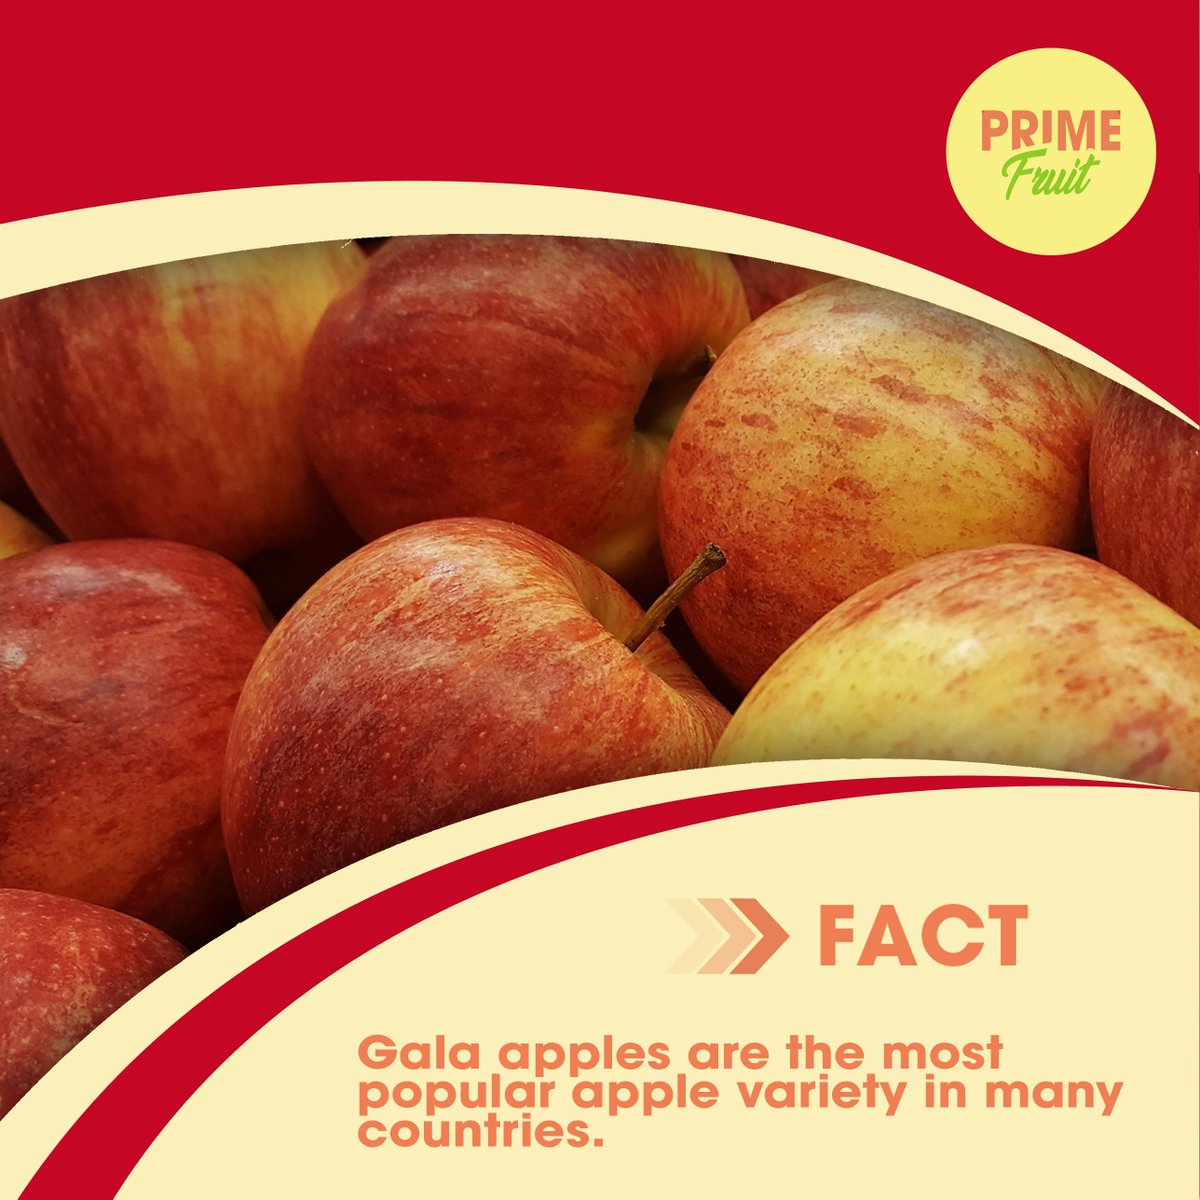 In 2018, the Gala apple surpassed the classic Red Delicious in popularity. It’s currently the number one selling apple in many countries. 🍎🍎🍎

#dxblife #UAE
#mydubailife #dxblife🇦🇪 #DubaiLife #dxb 
#MyDubai #DubaiFruits
#FruitDeliveryDubai #DubaiFruitDelivery #emirates #Gala